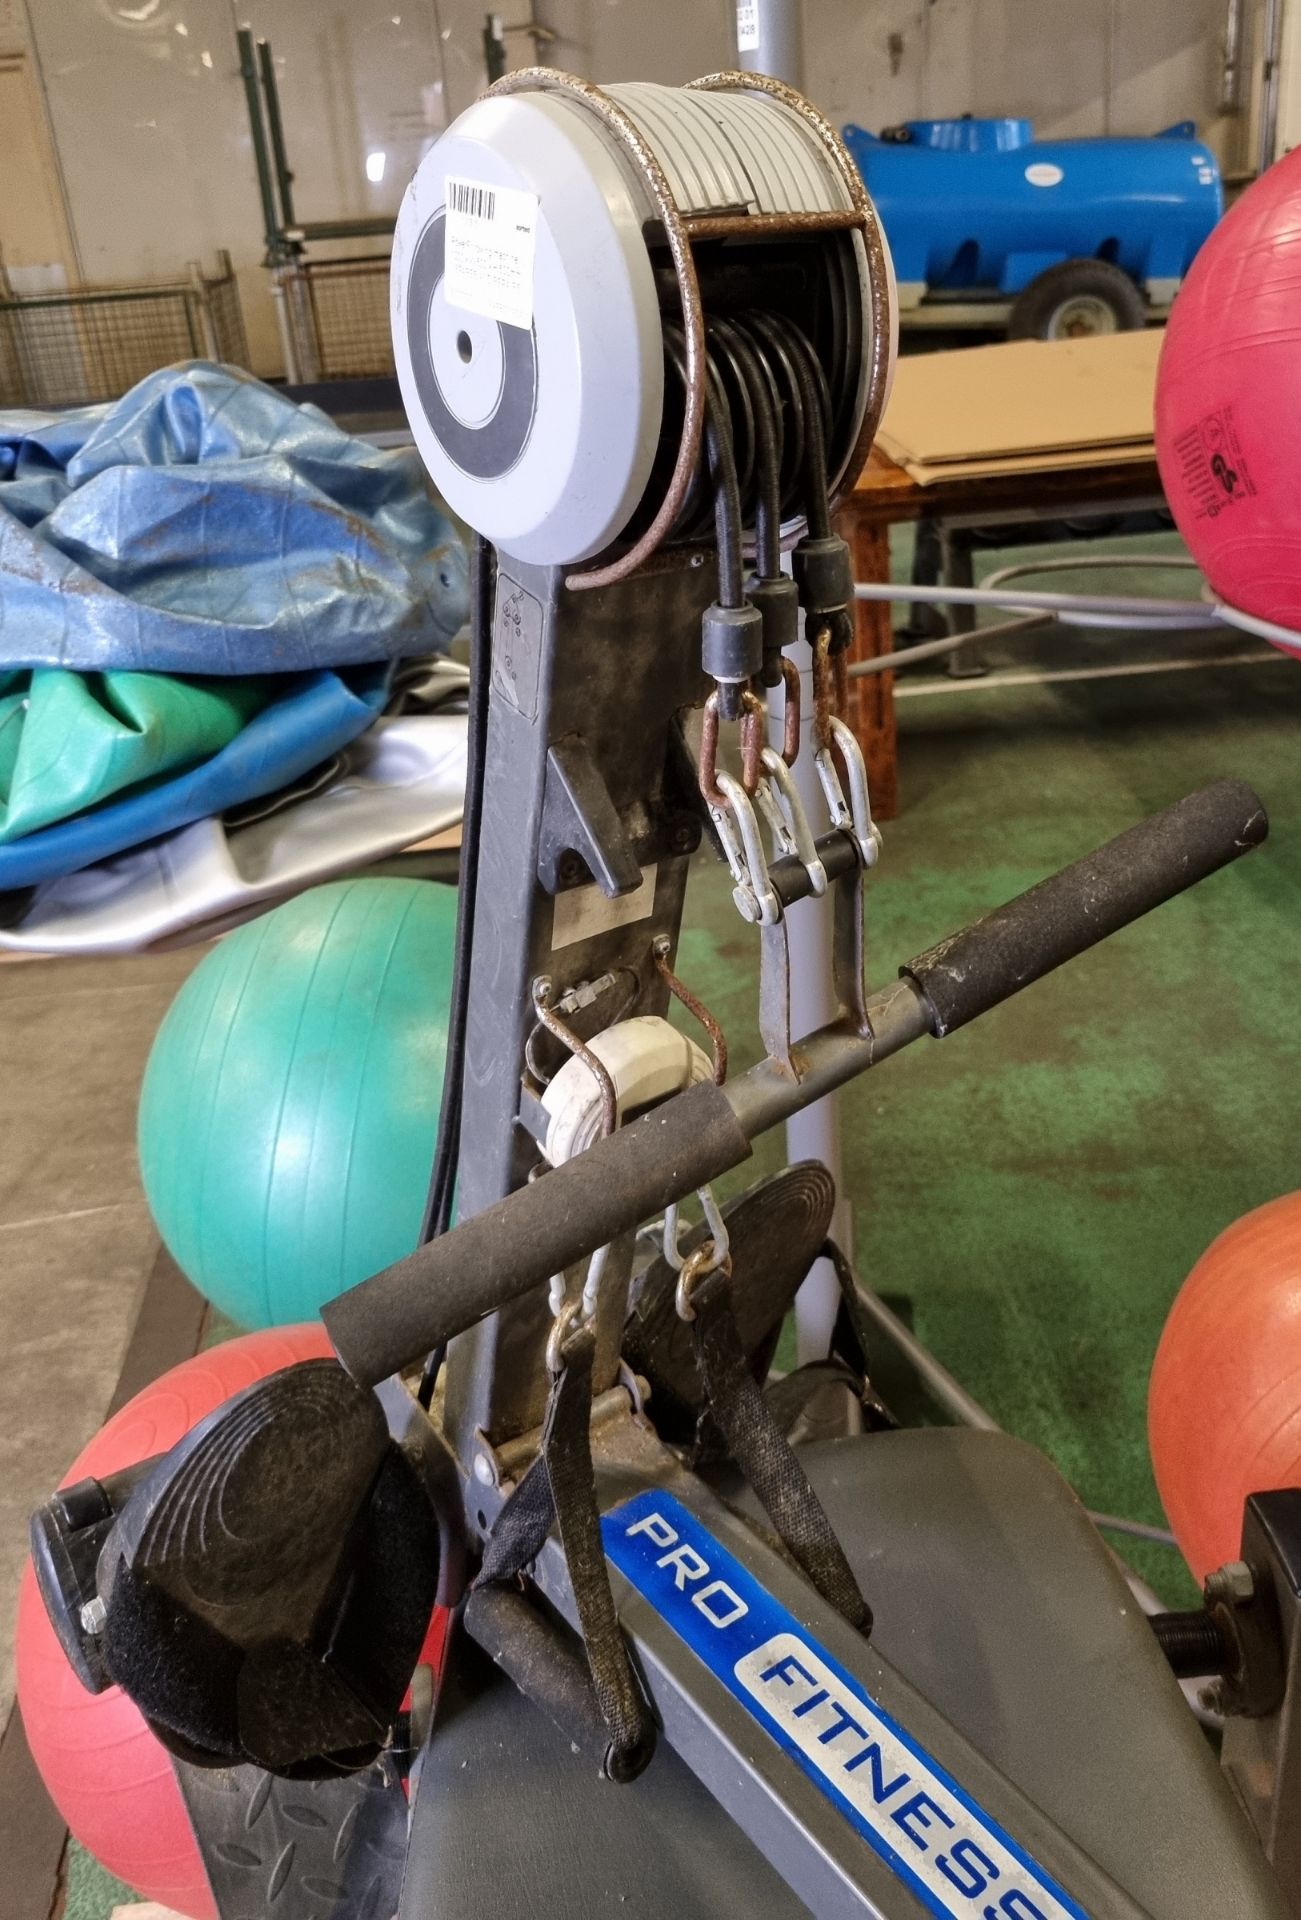 PowerFit rowing machine SPARES AND REPAIRS & Hammer Strength seated calf raise - see desc. - Image 6 of 7